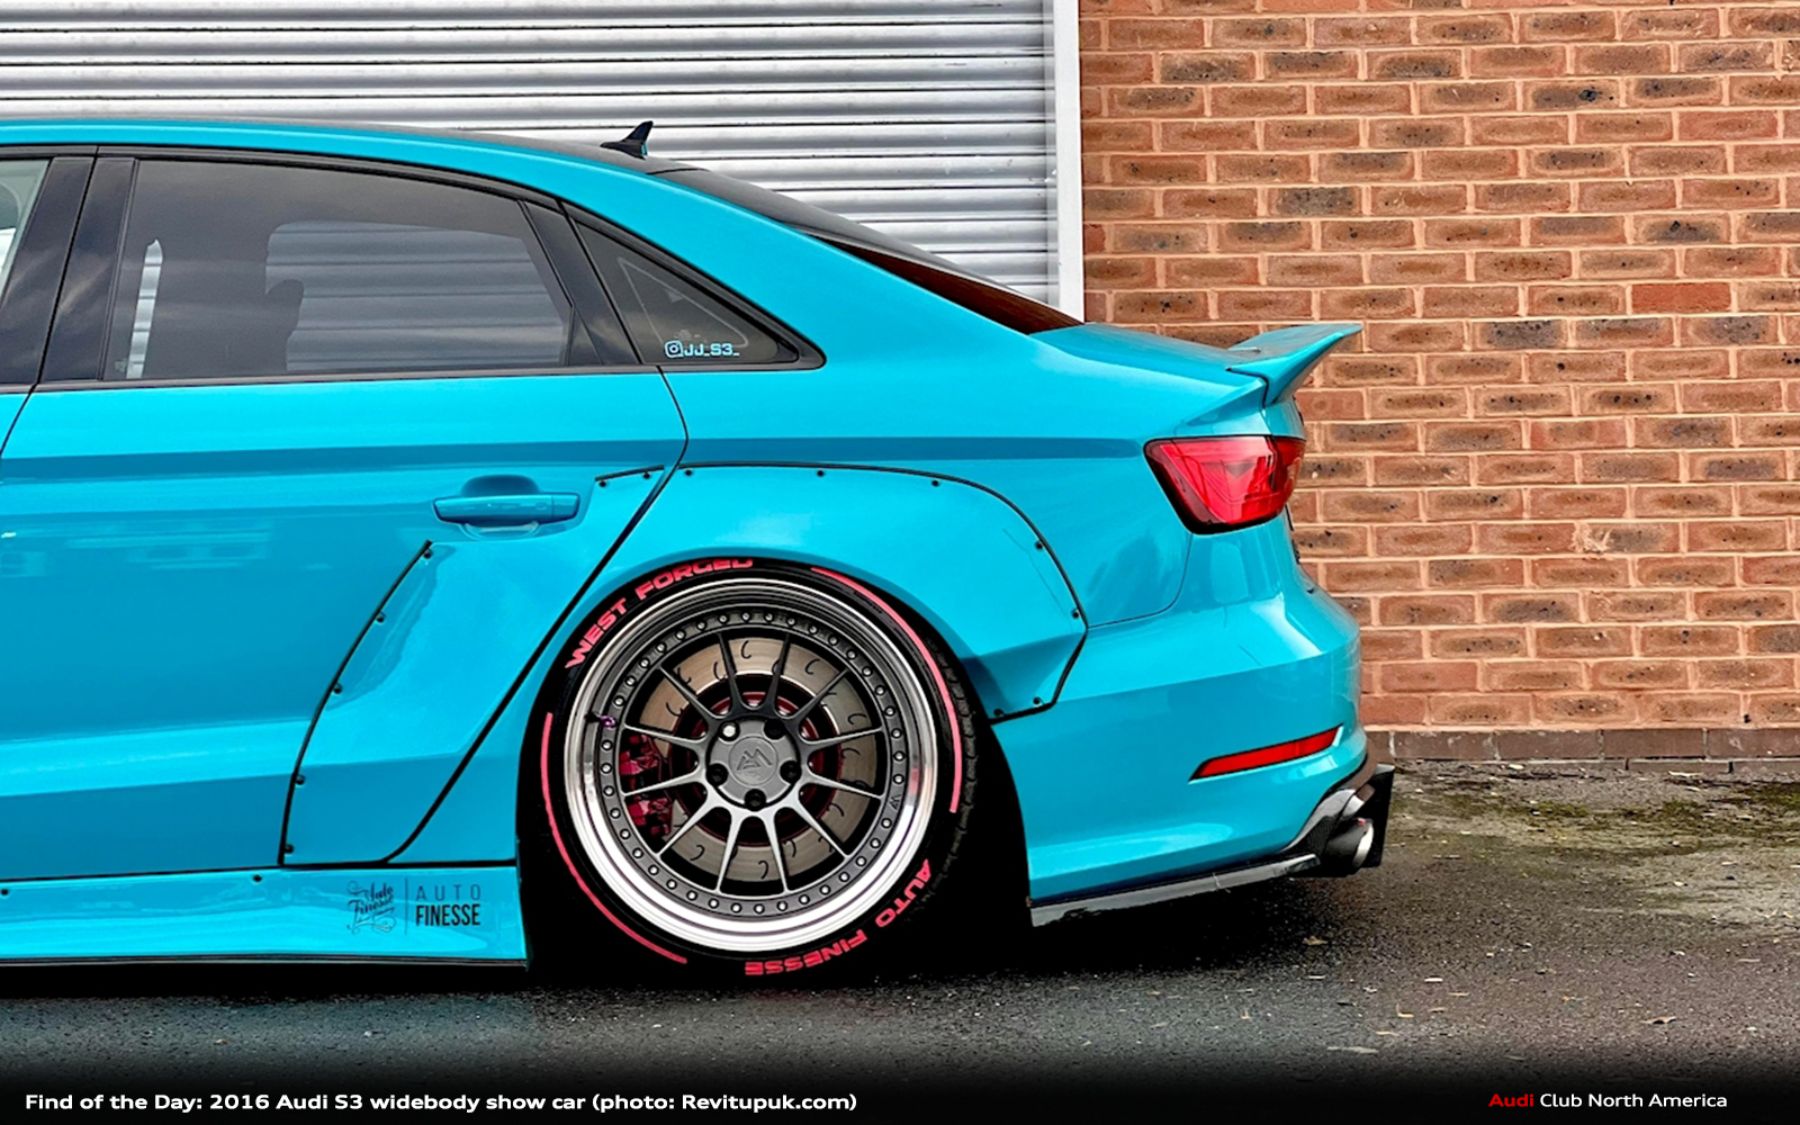 Find of the Day: 2016 Audi S3 Widebody Show Car - Audi Club North